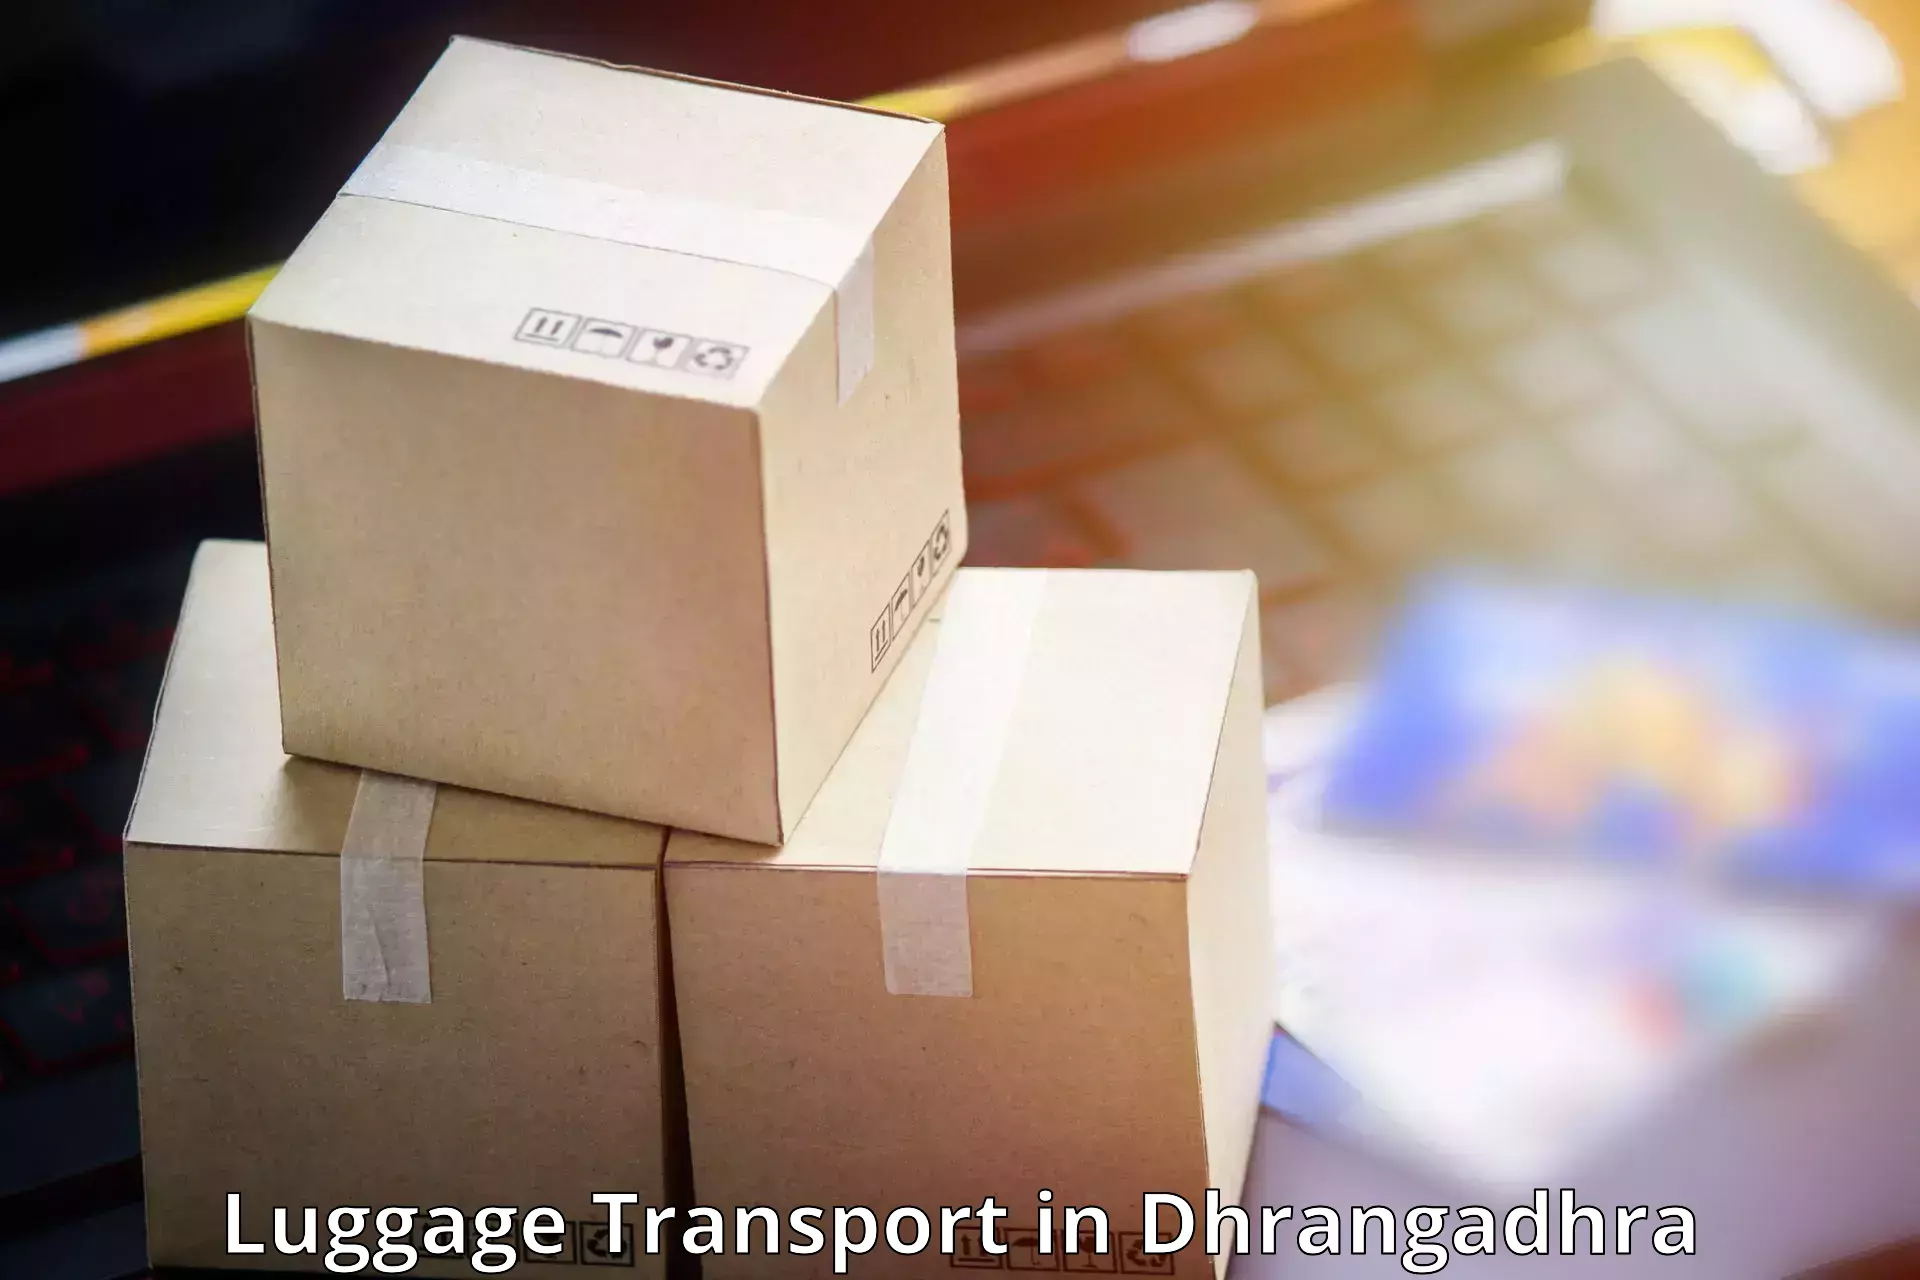 Baggage delivery management in Dhrangadhra